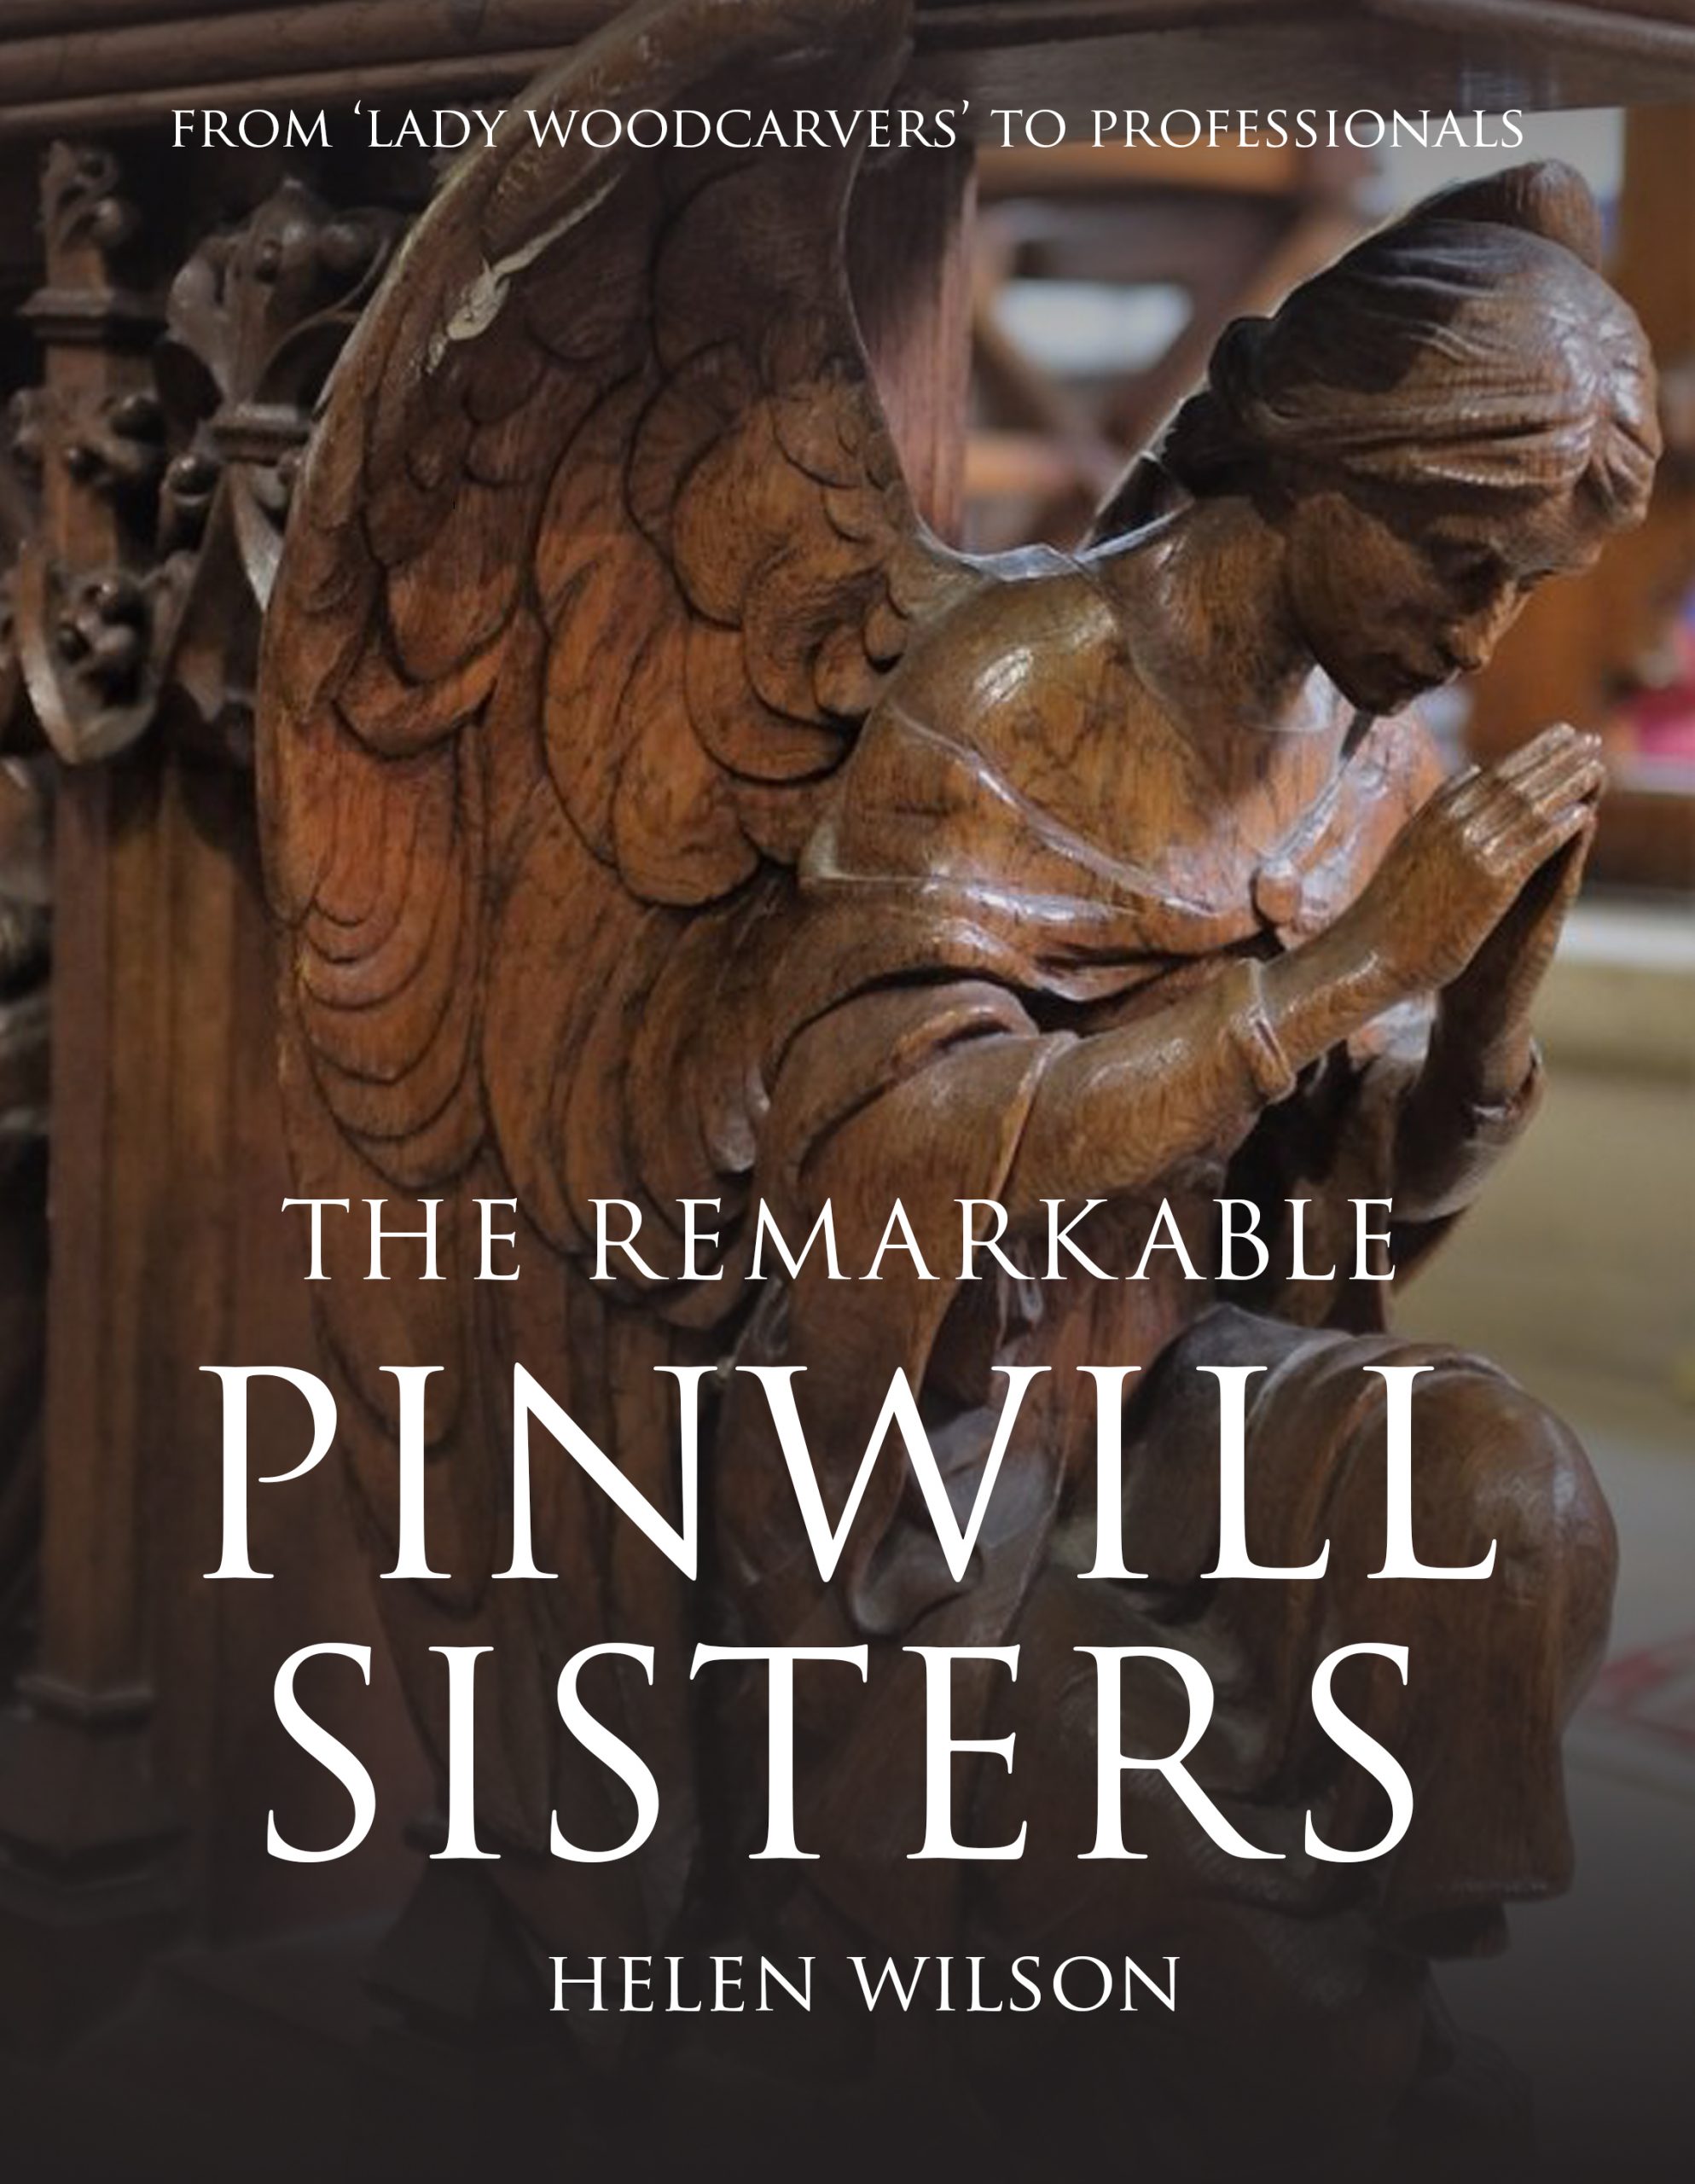 The Remarkable Pinwill Sisters book cover